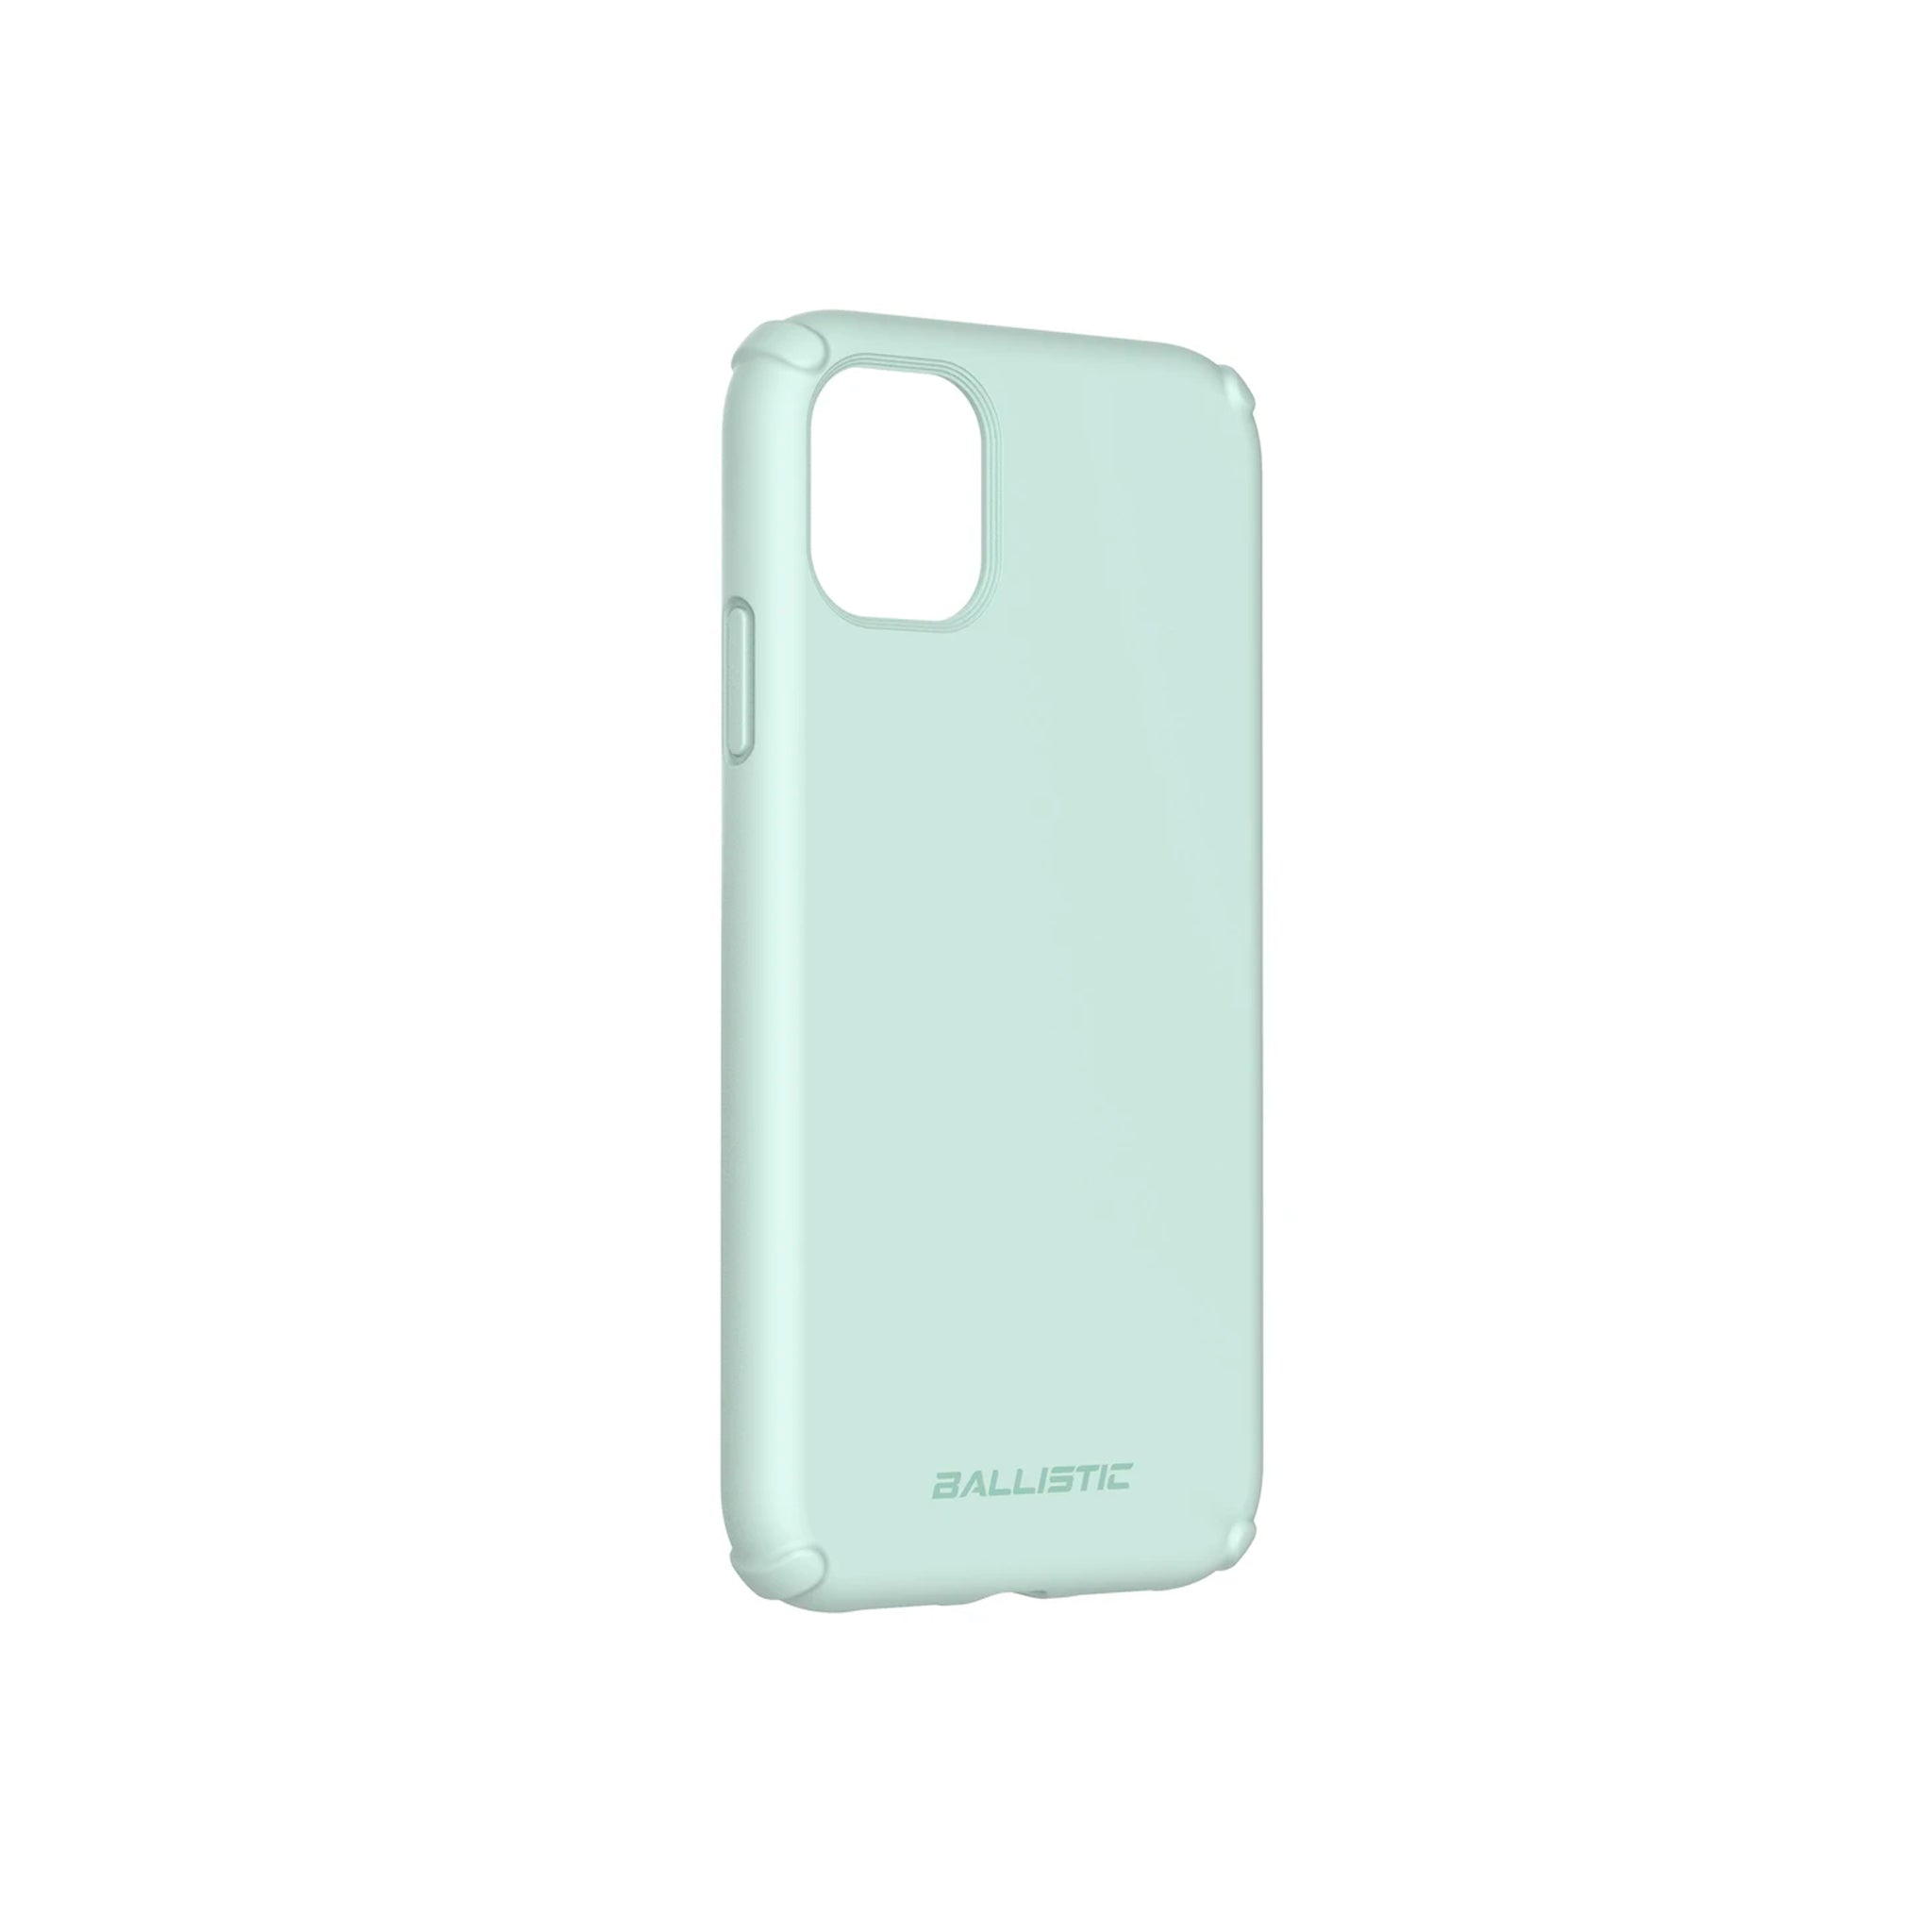 Ballistic - Soft Jacket Series for Apple iPhone 11 - Teal